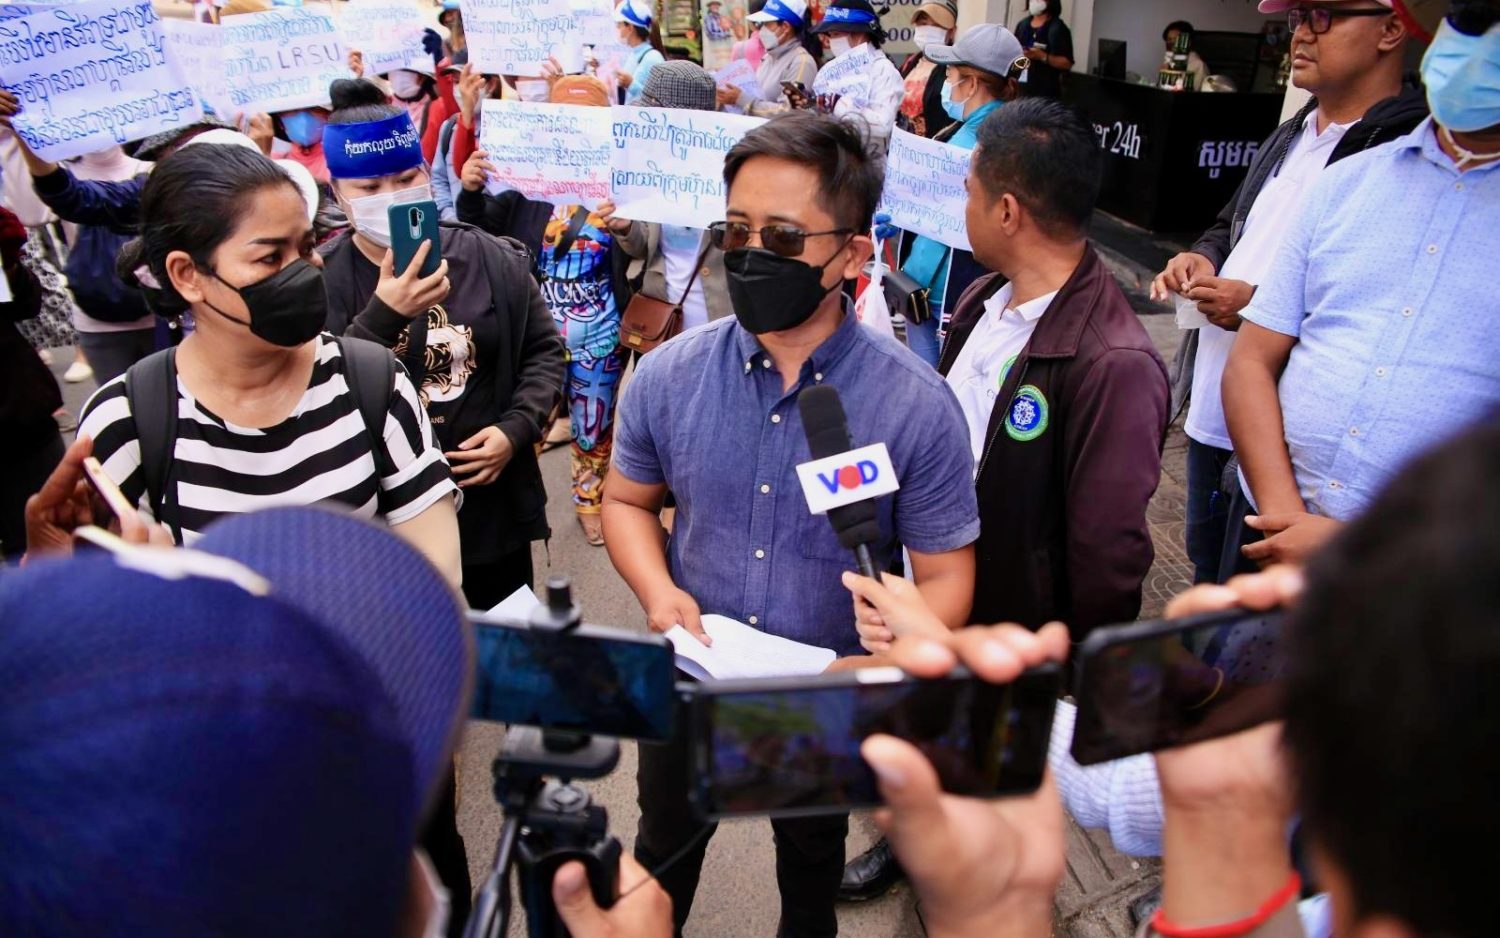 Union leader Yang Sophorn and Central staffer Khun Tharo speak to the media at the NagaWorld workers' protest in Phnom Penh on July 5, 2022.